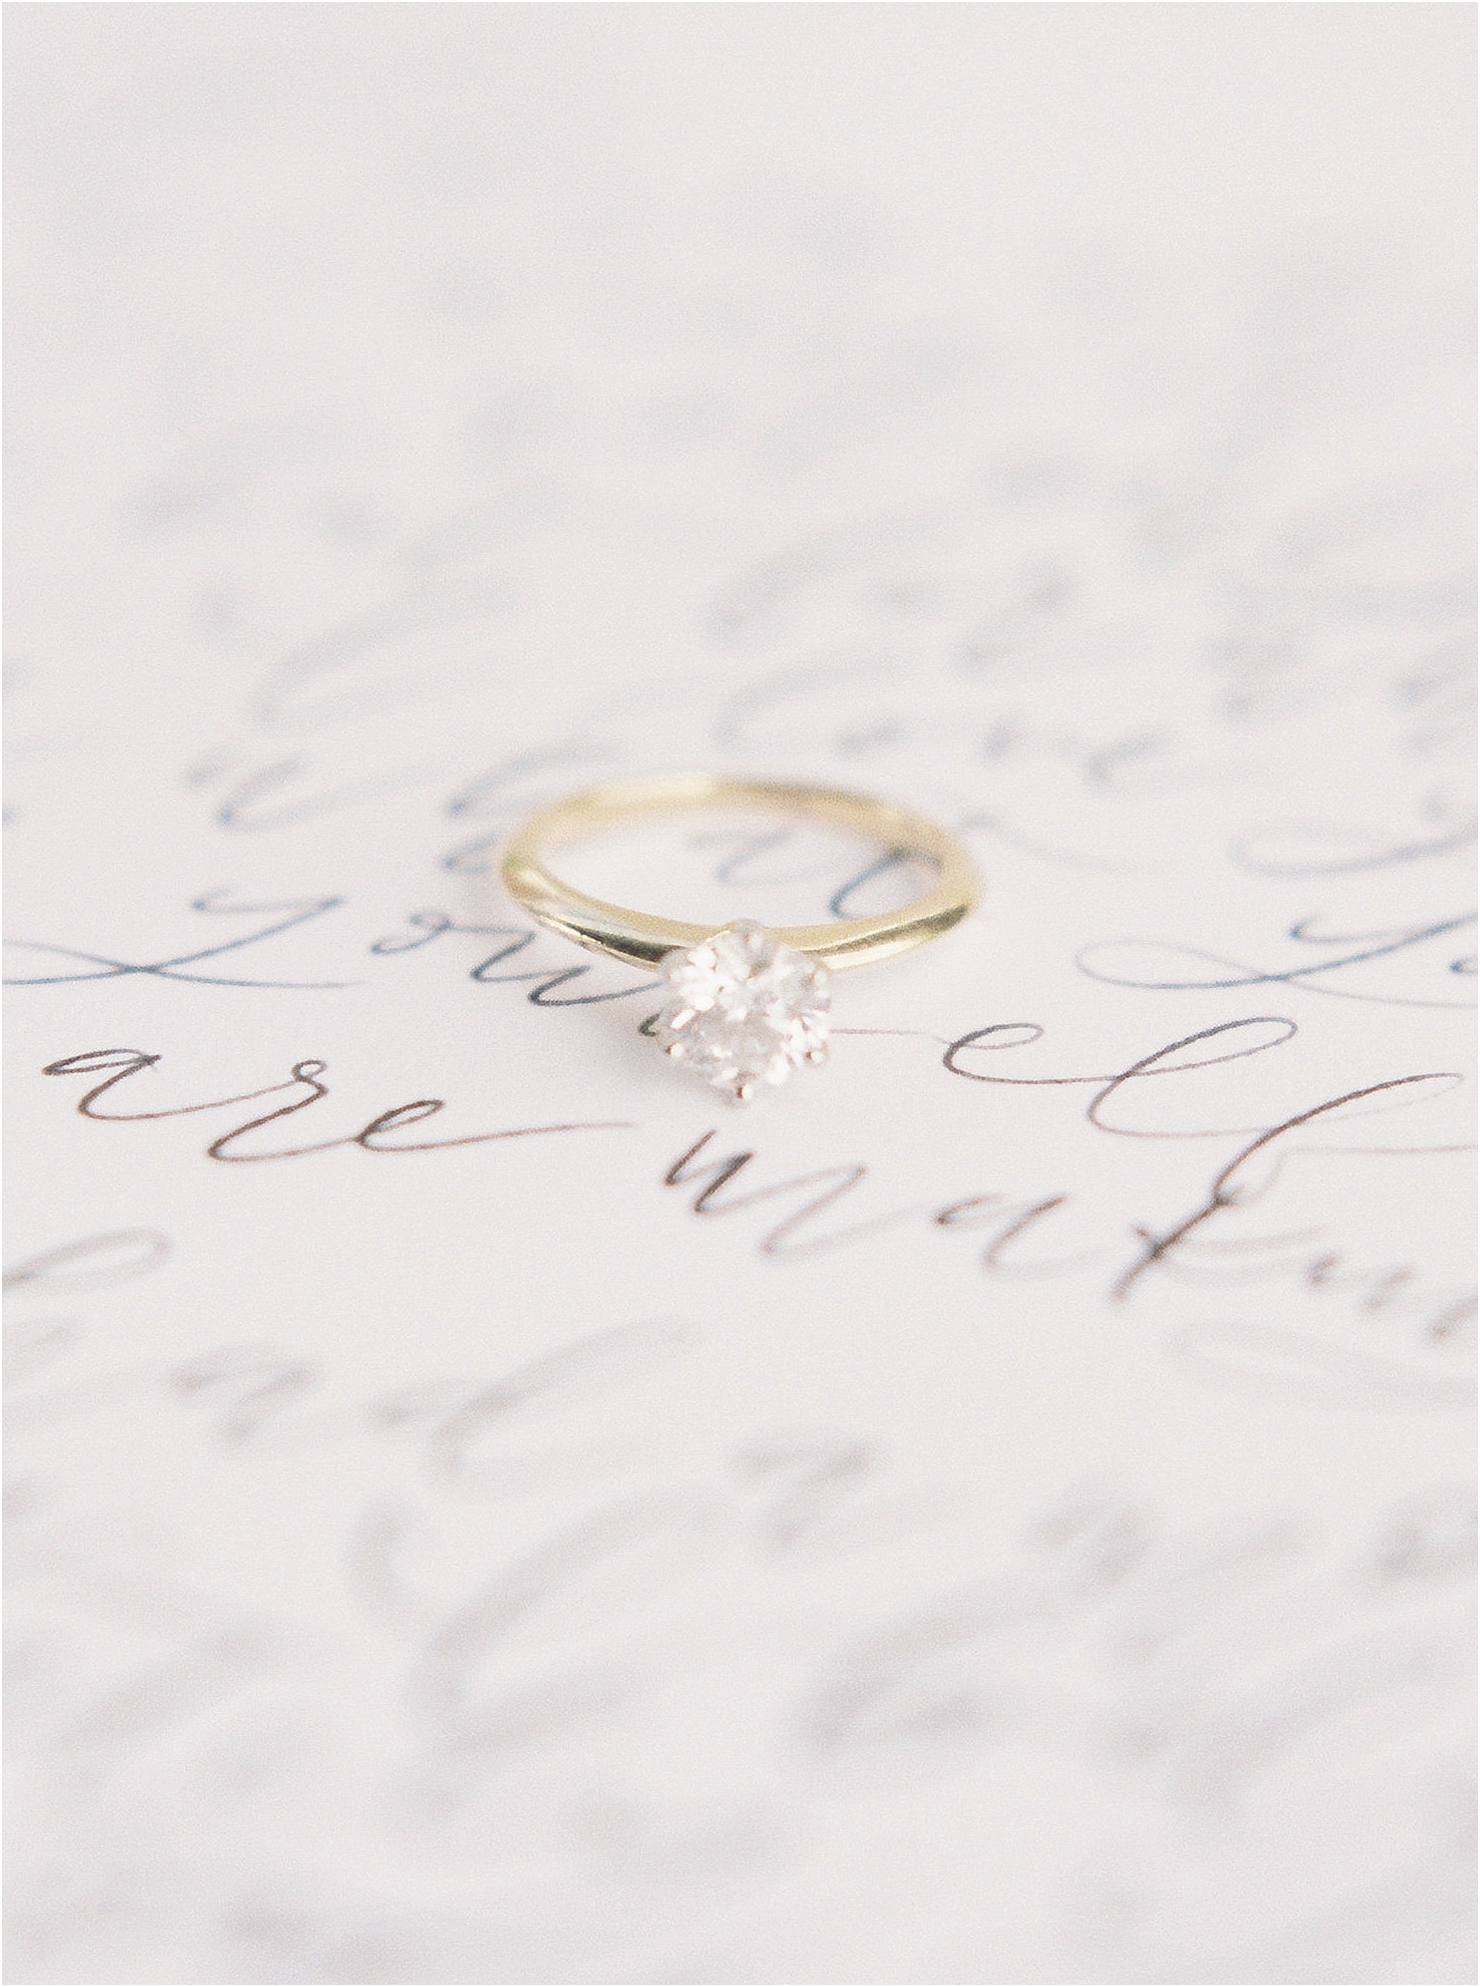 Wedding Ring Calligraphy Vows Chateau Selah Madeline Trent Romantic Wedding Photographer